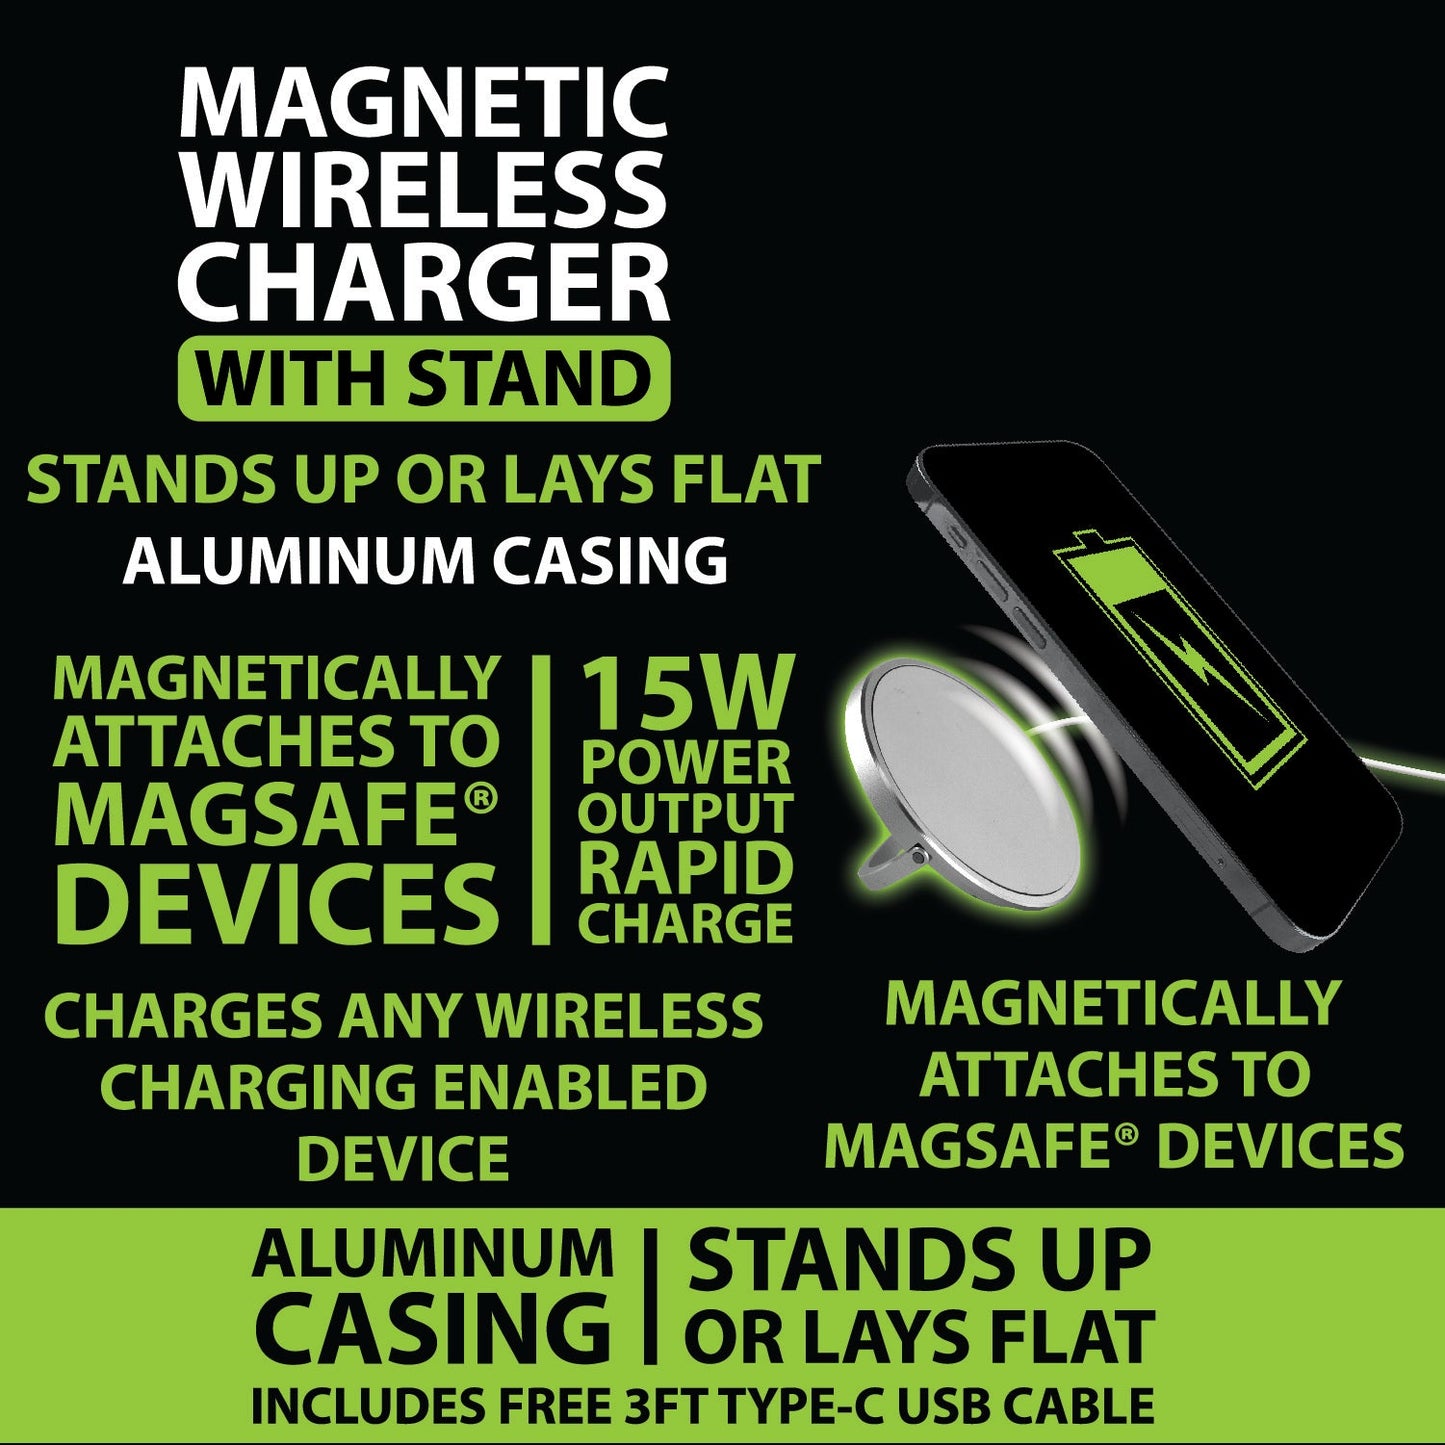 ITEM NUMBER 022790 MAGNETIC WIRELESS CHARGING STAND 6 PIECES PER DISPLAY